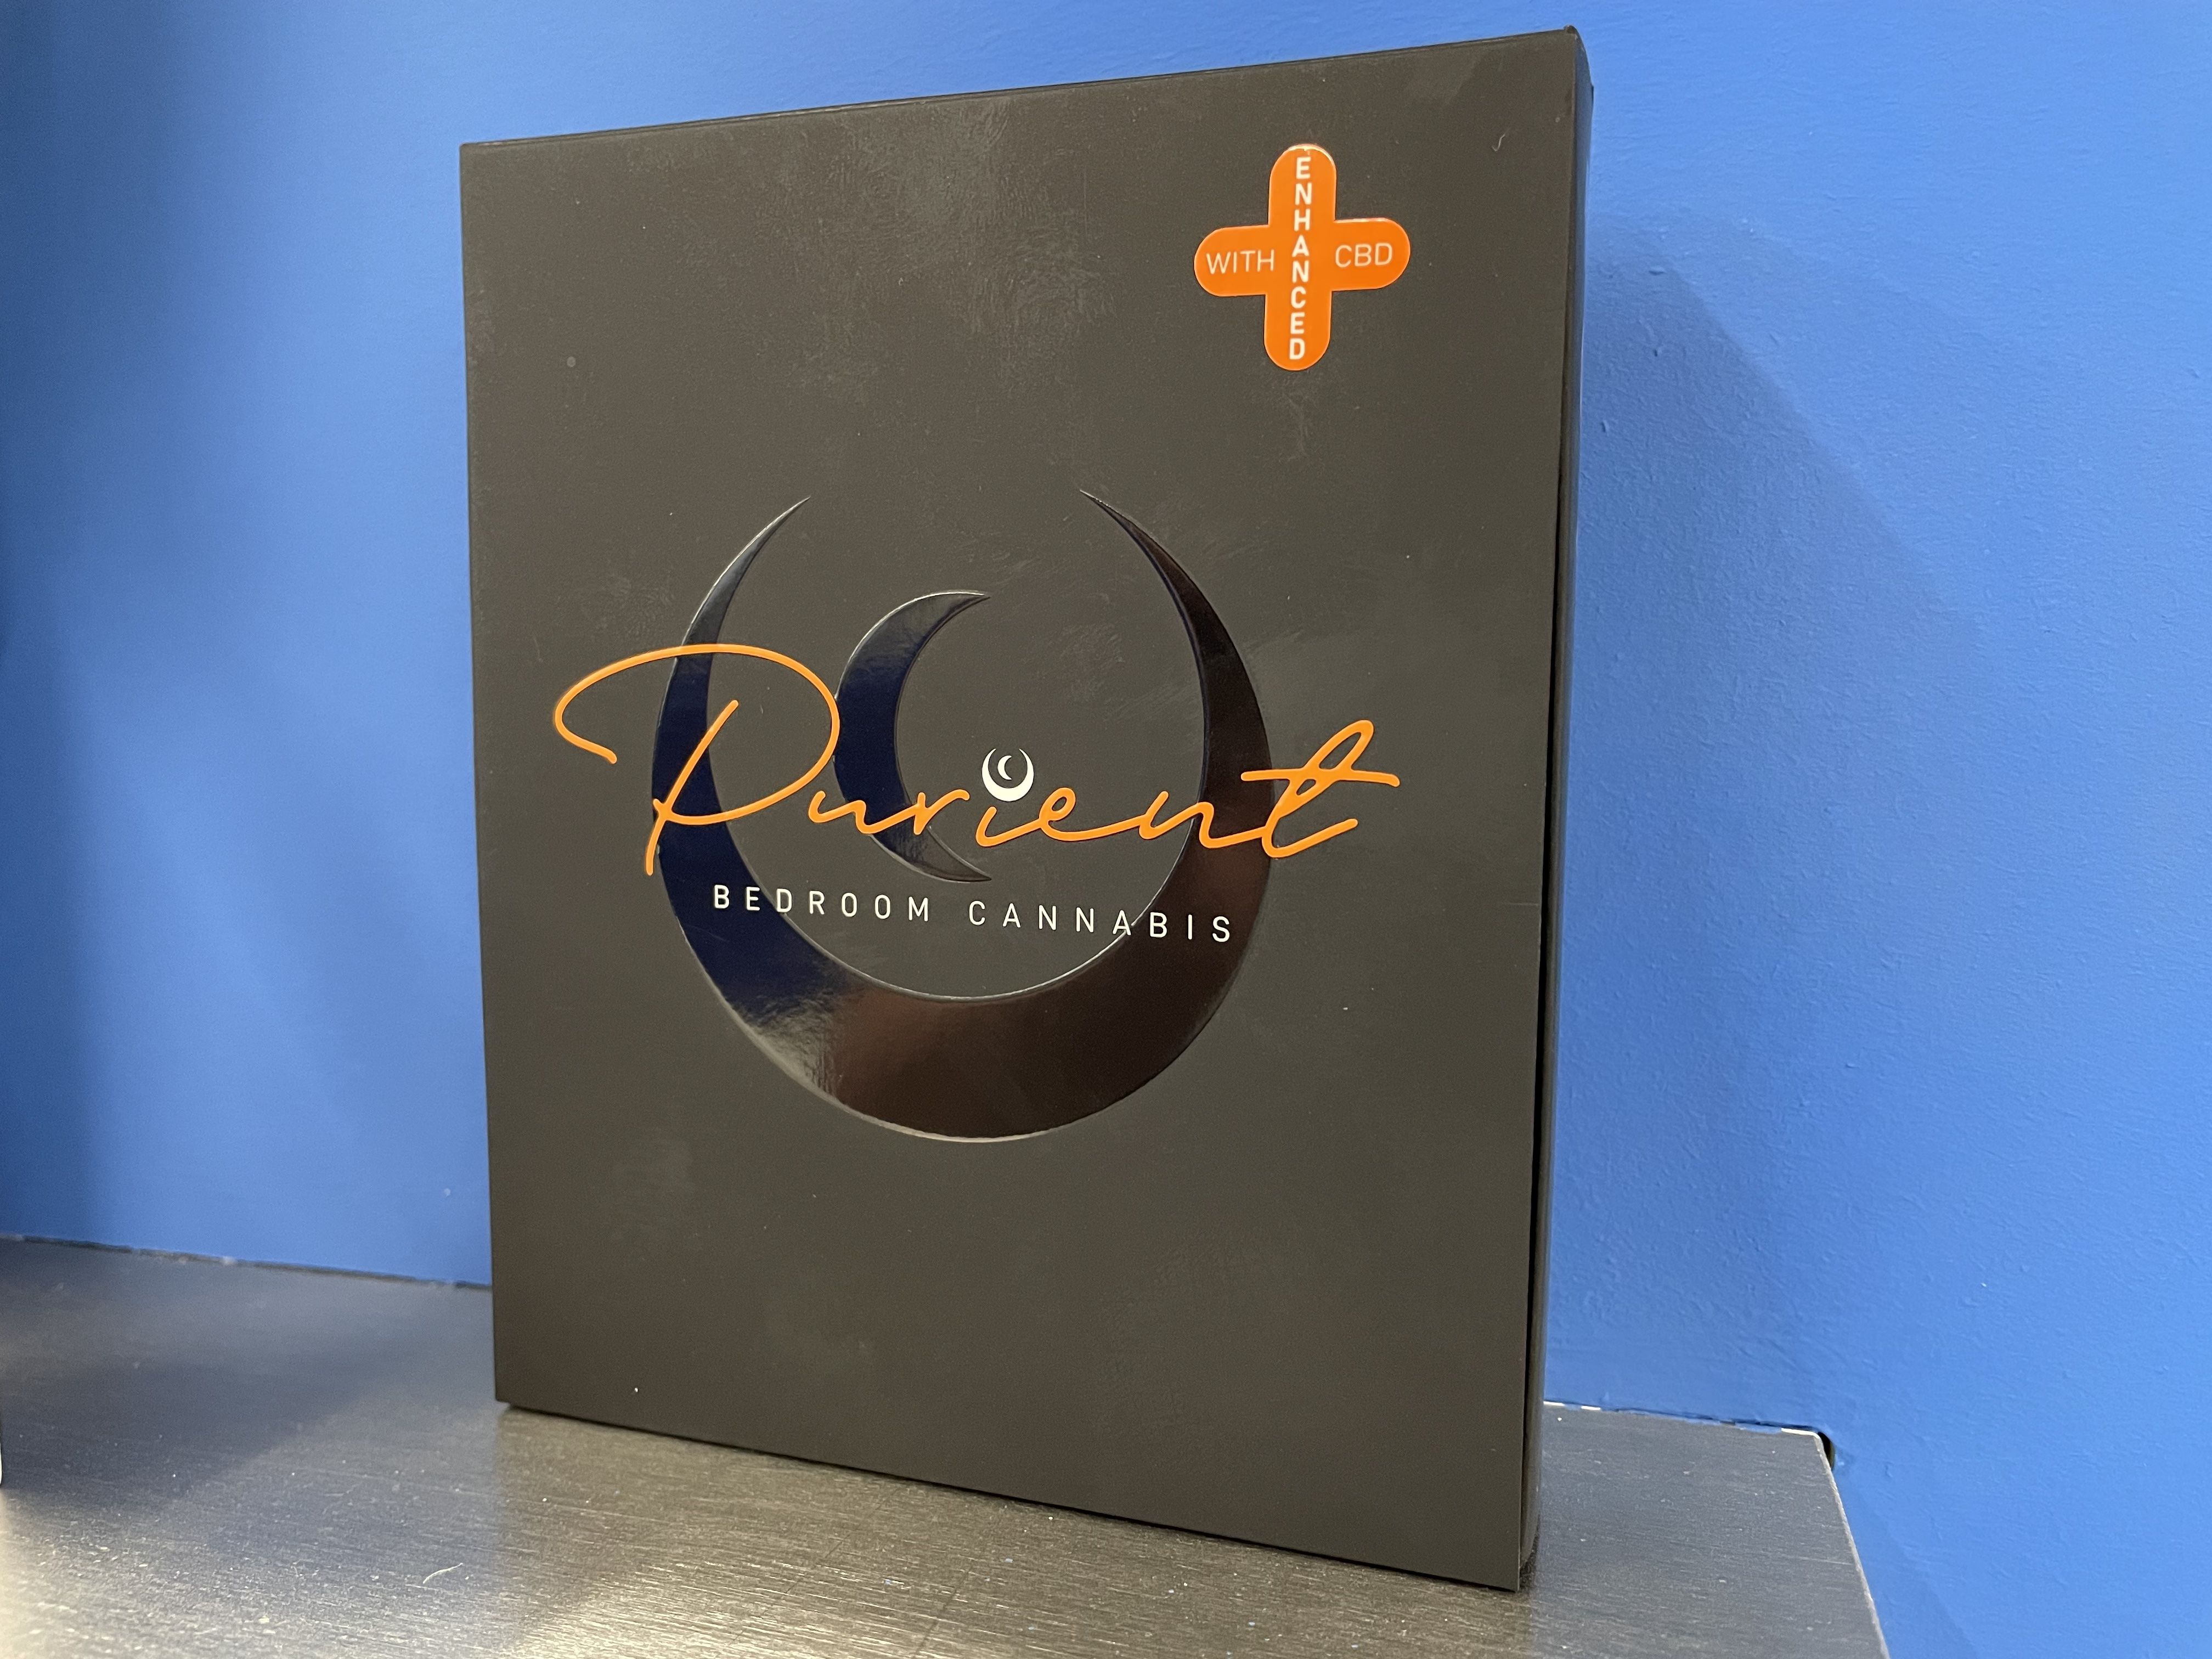 A black box with the words Purient Bedroom Cannabis in orange sits on a blue display wall.